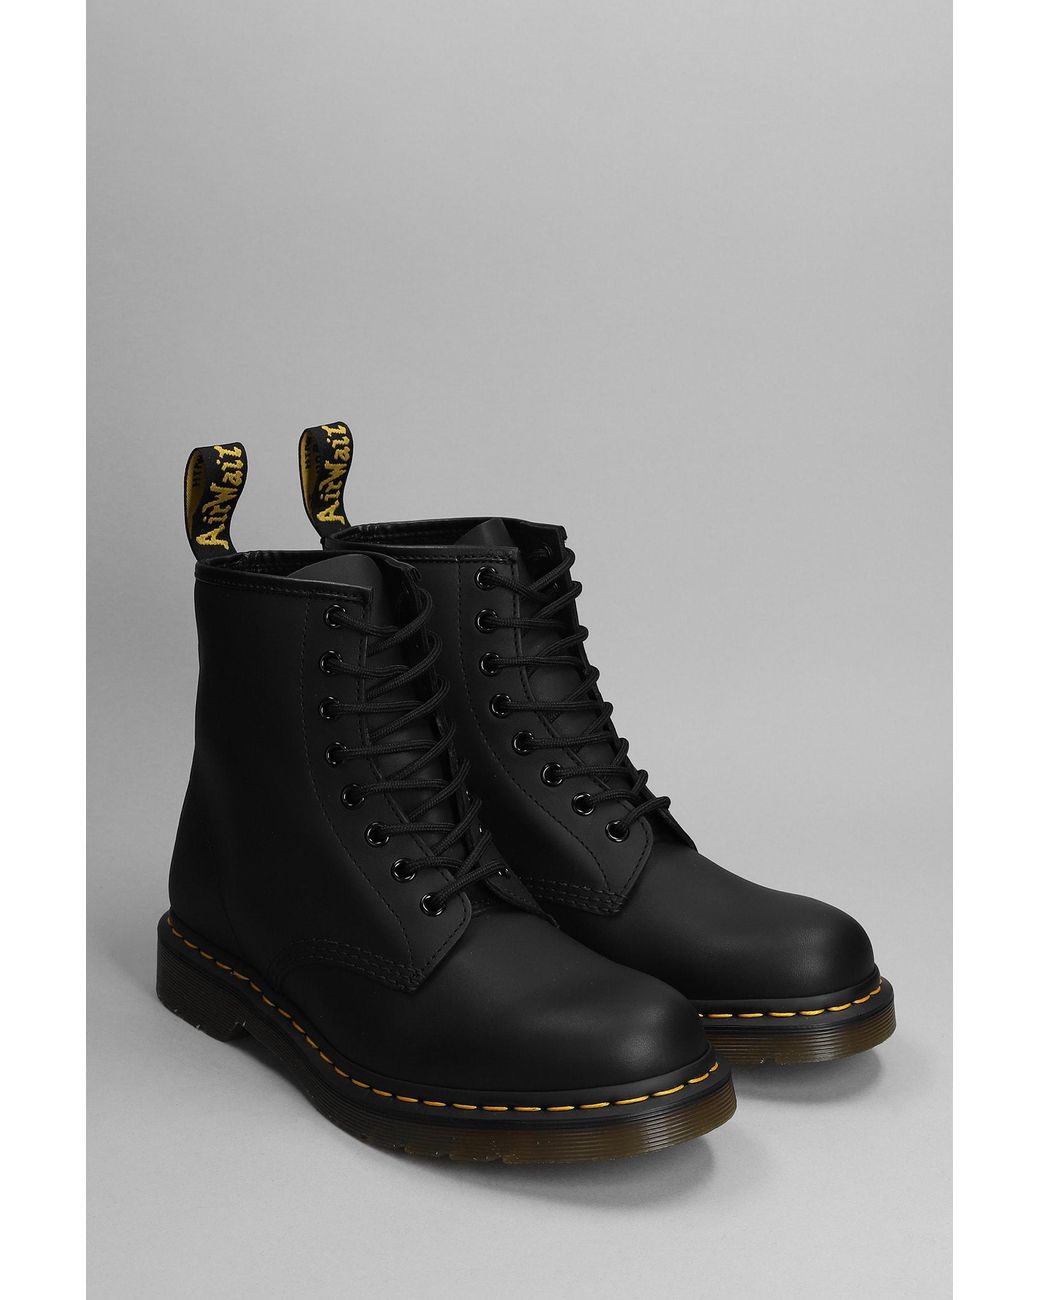 Dr. Martens 1460 Greasy Combat Boots In Black Leather for Men | Lyst